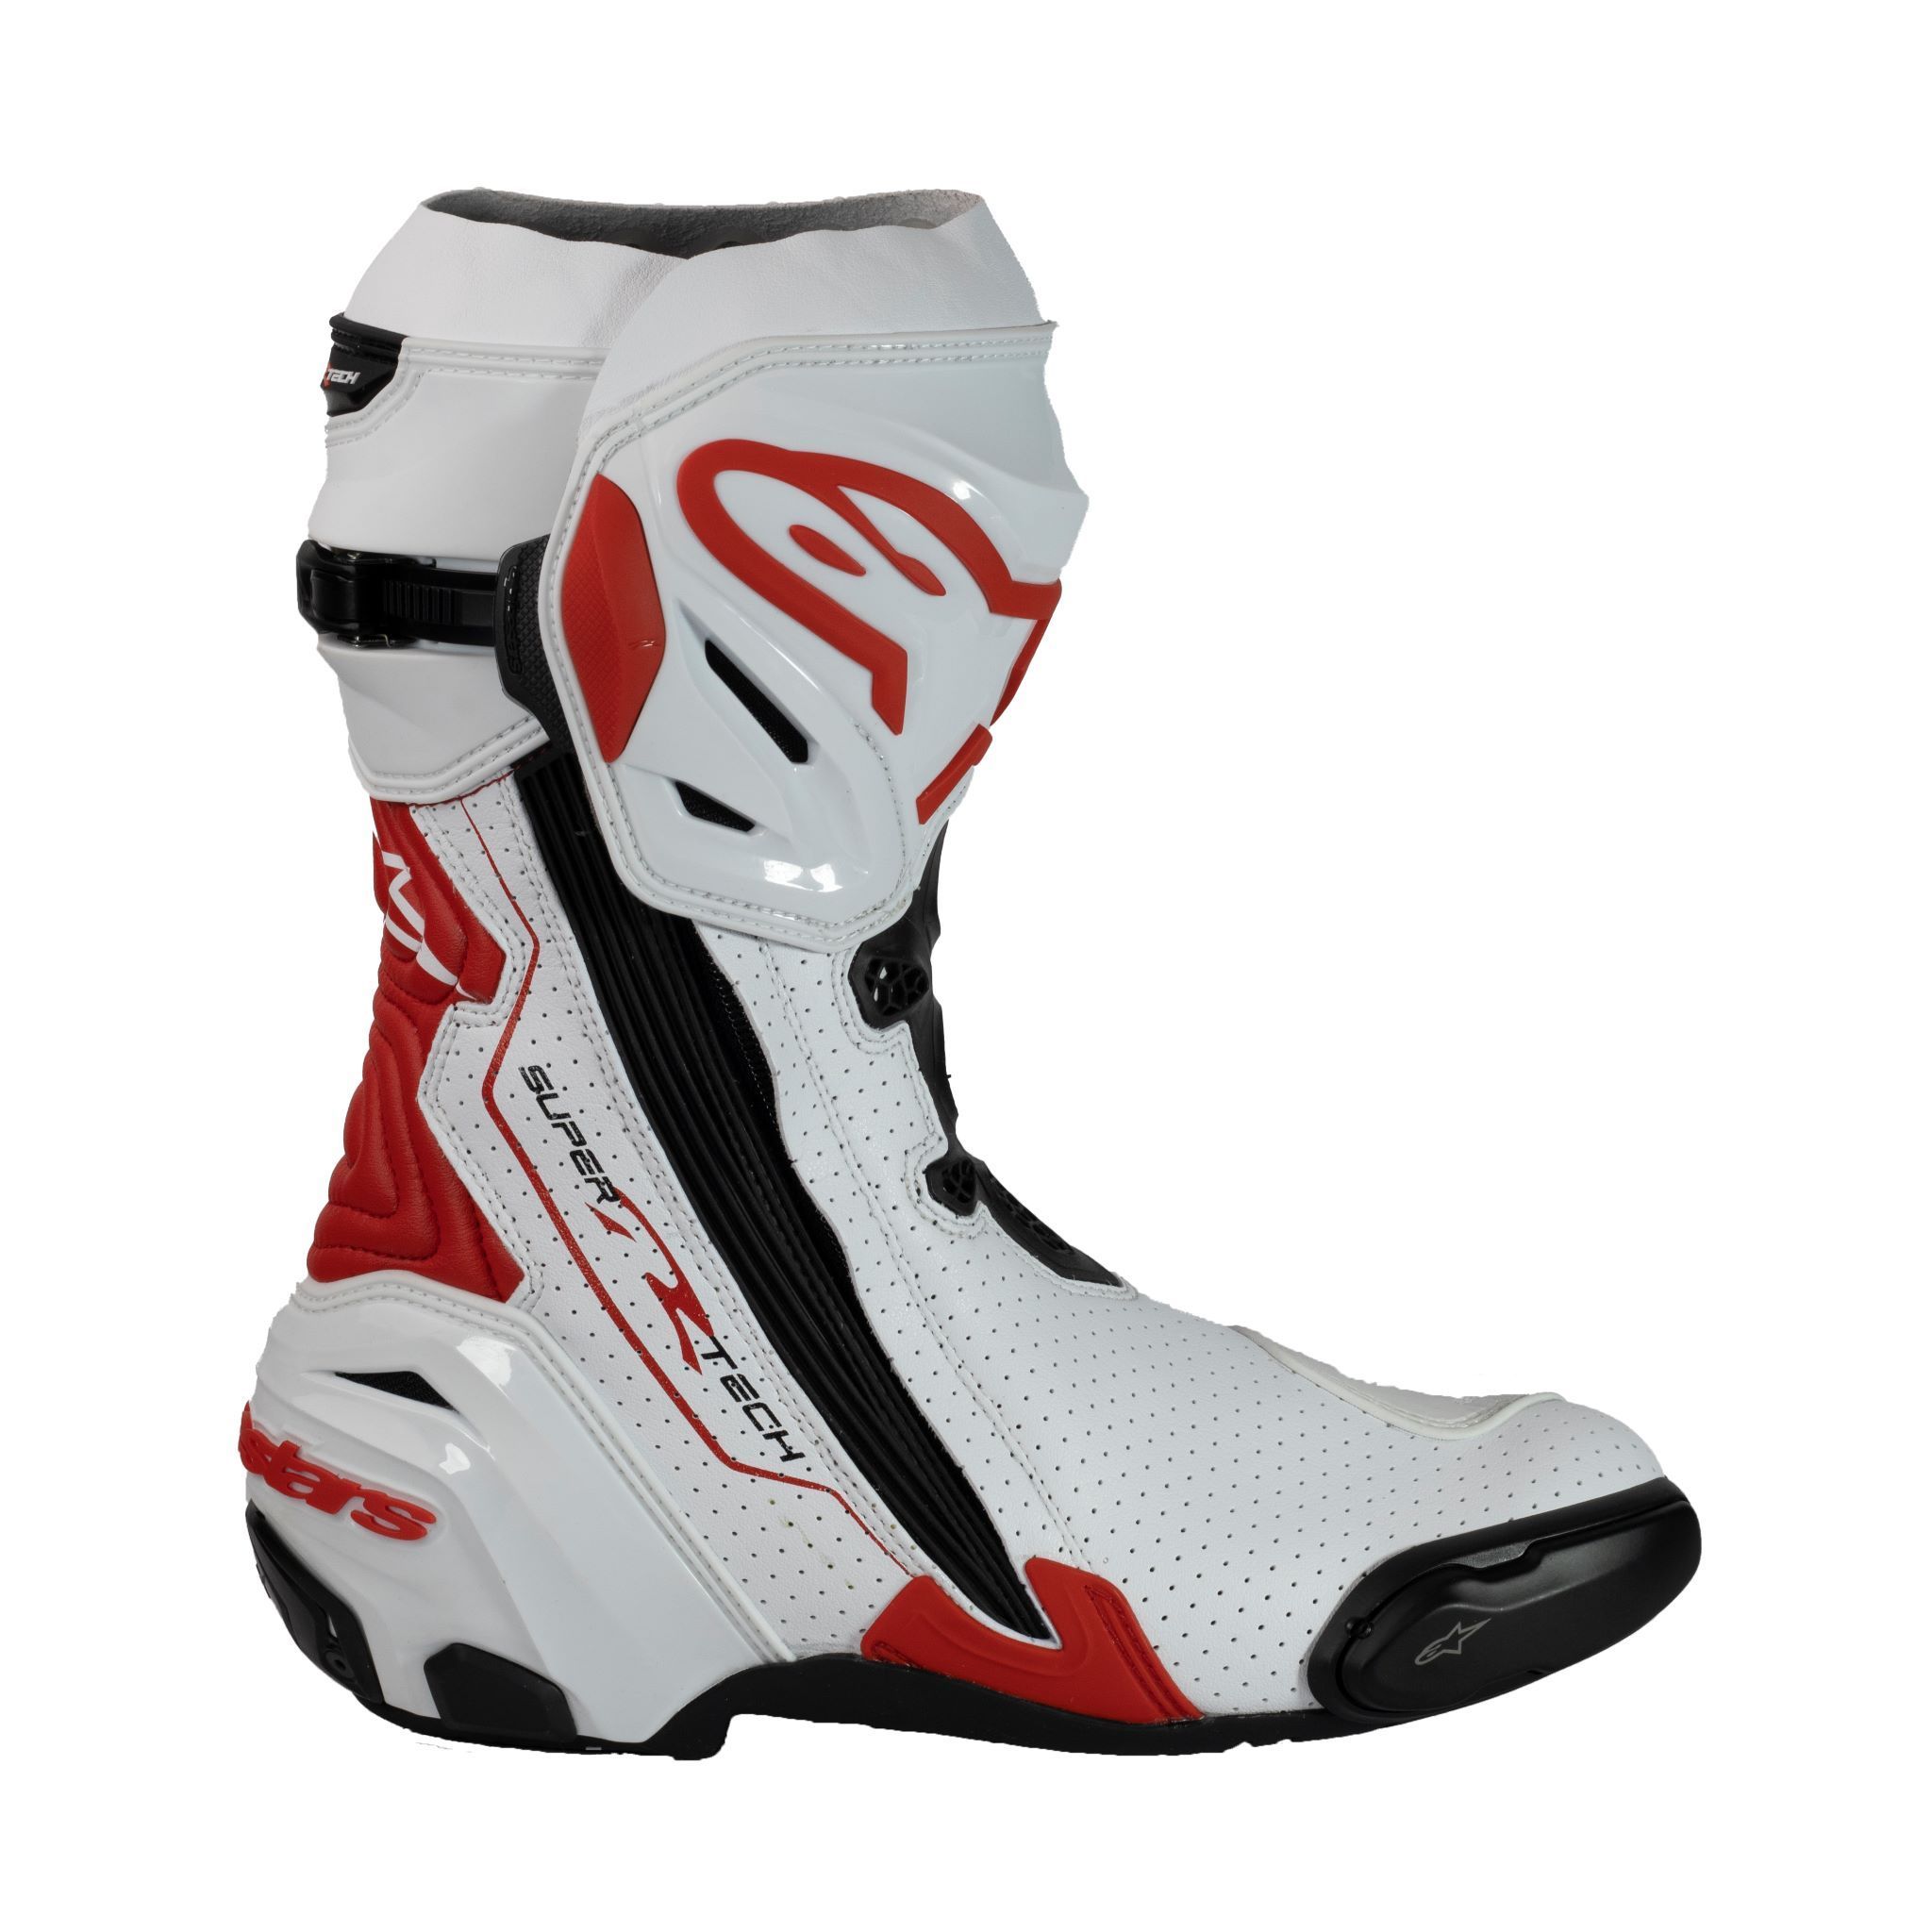 ALPINESTARS SUPERTECH R RIDERS BOOT White Red Vented